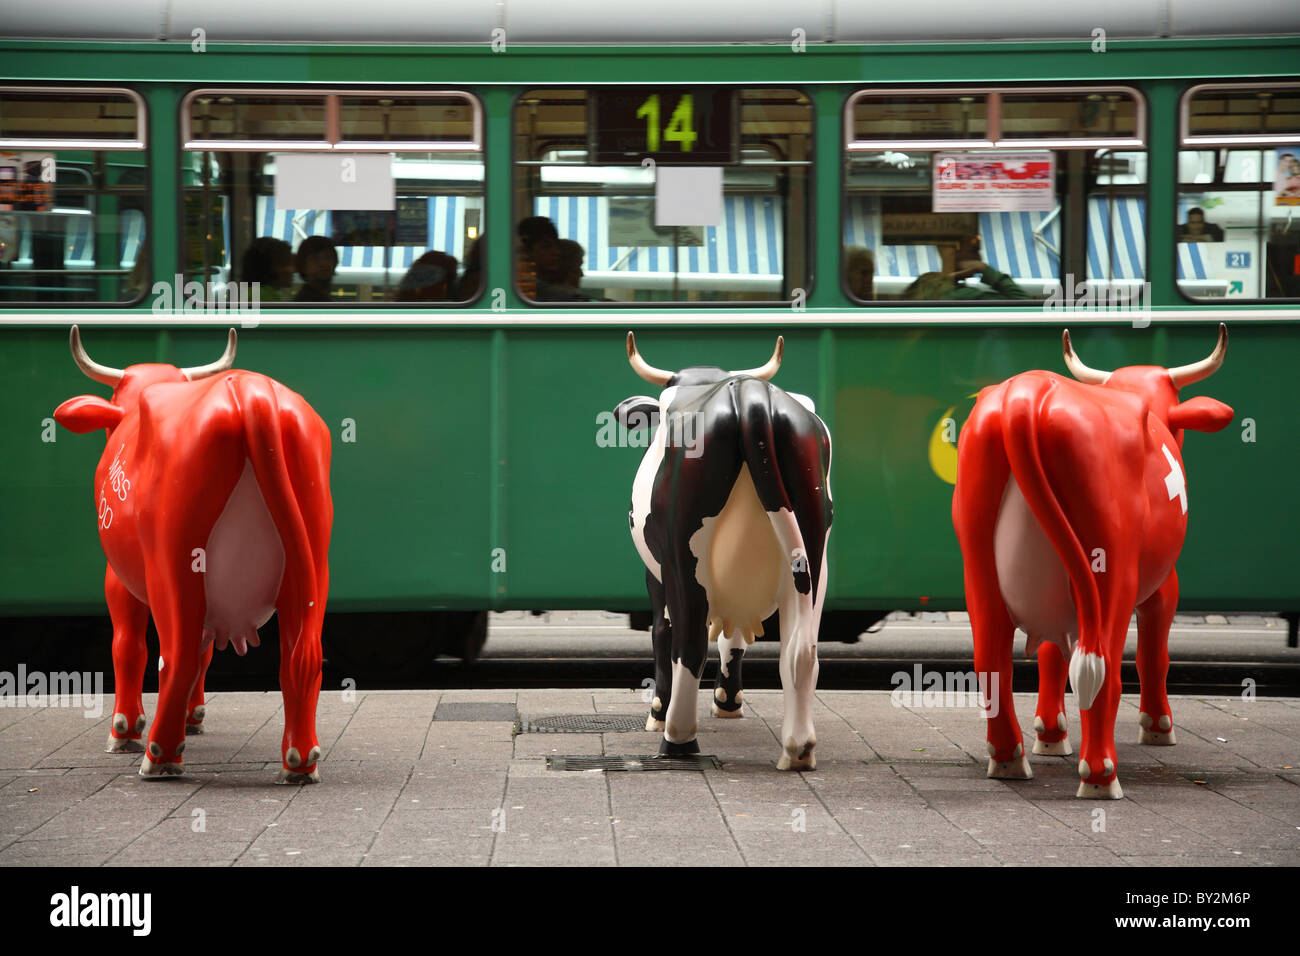 Swiss cows used as a decoration, Basel, Switzerland Stock Photo